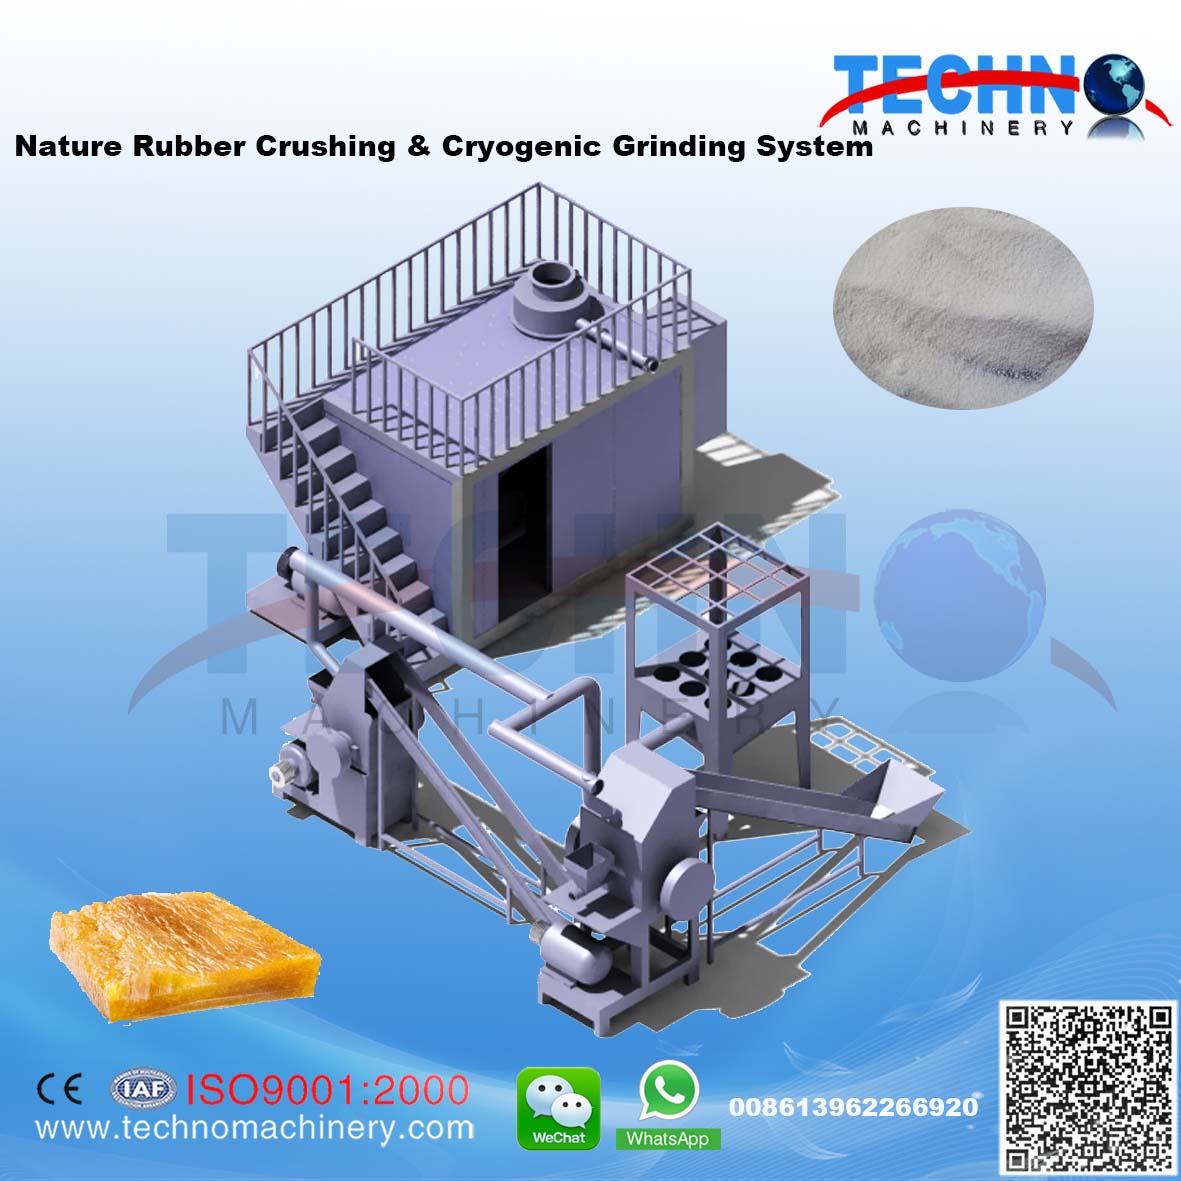 Nature Rubber Field Cryogenic Grinder